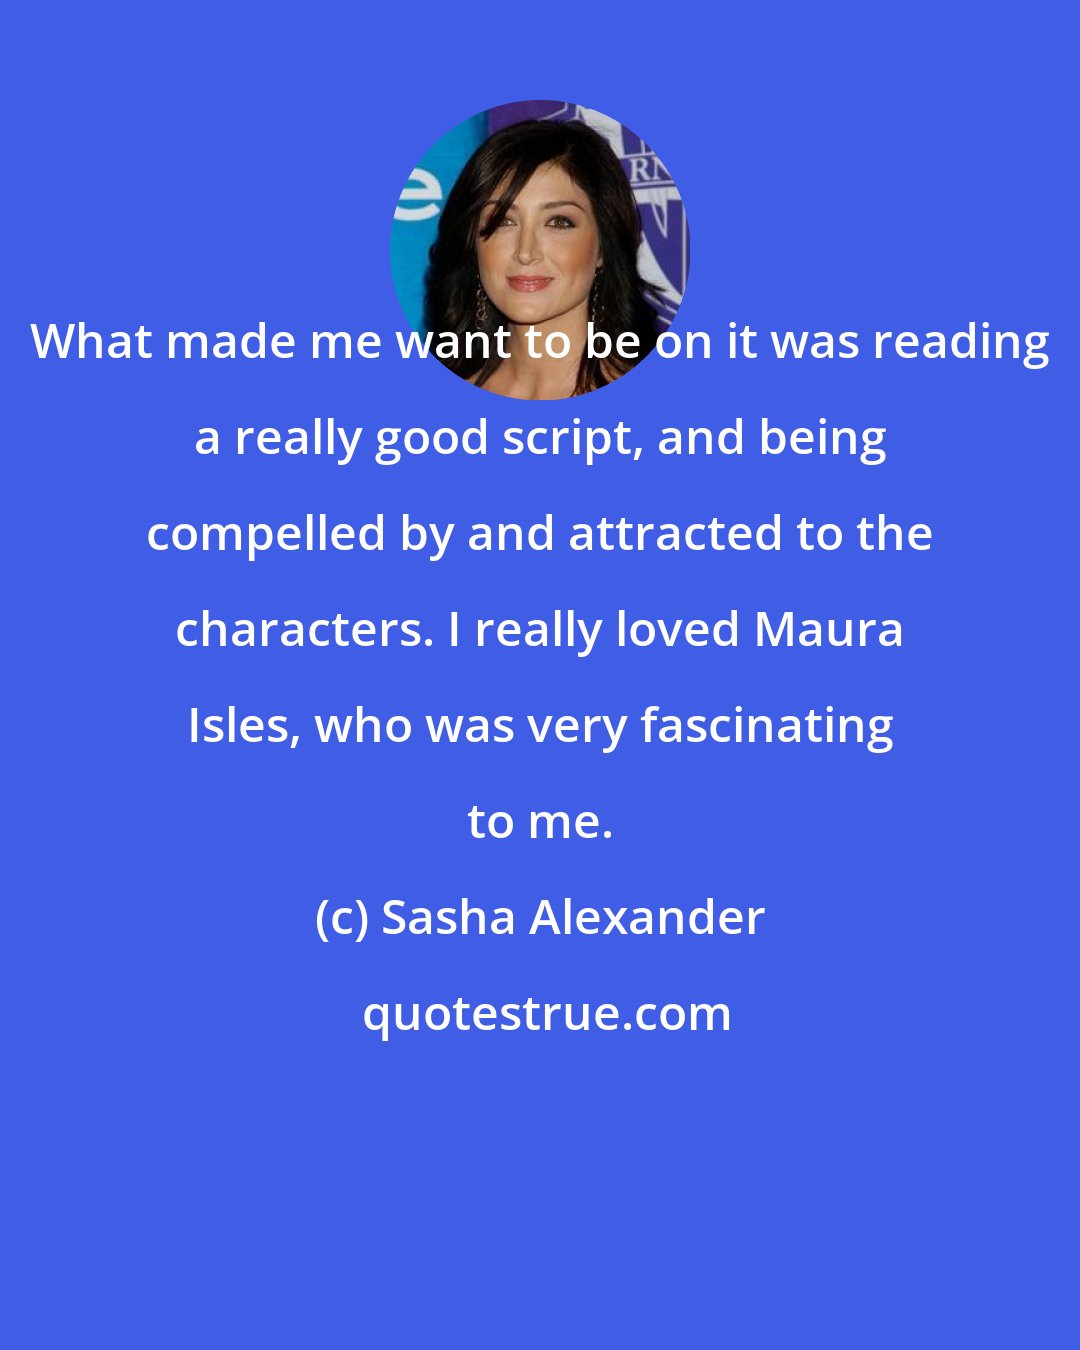 Sasha Alexander: What made me want to be on it was reading a really good script, and being compelled by and attracted to the characters. I really loved Maura Isles, who was very fascinating to me.